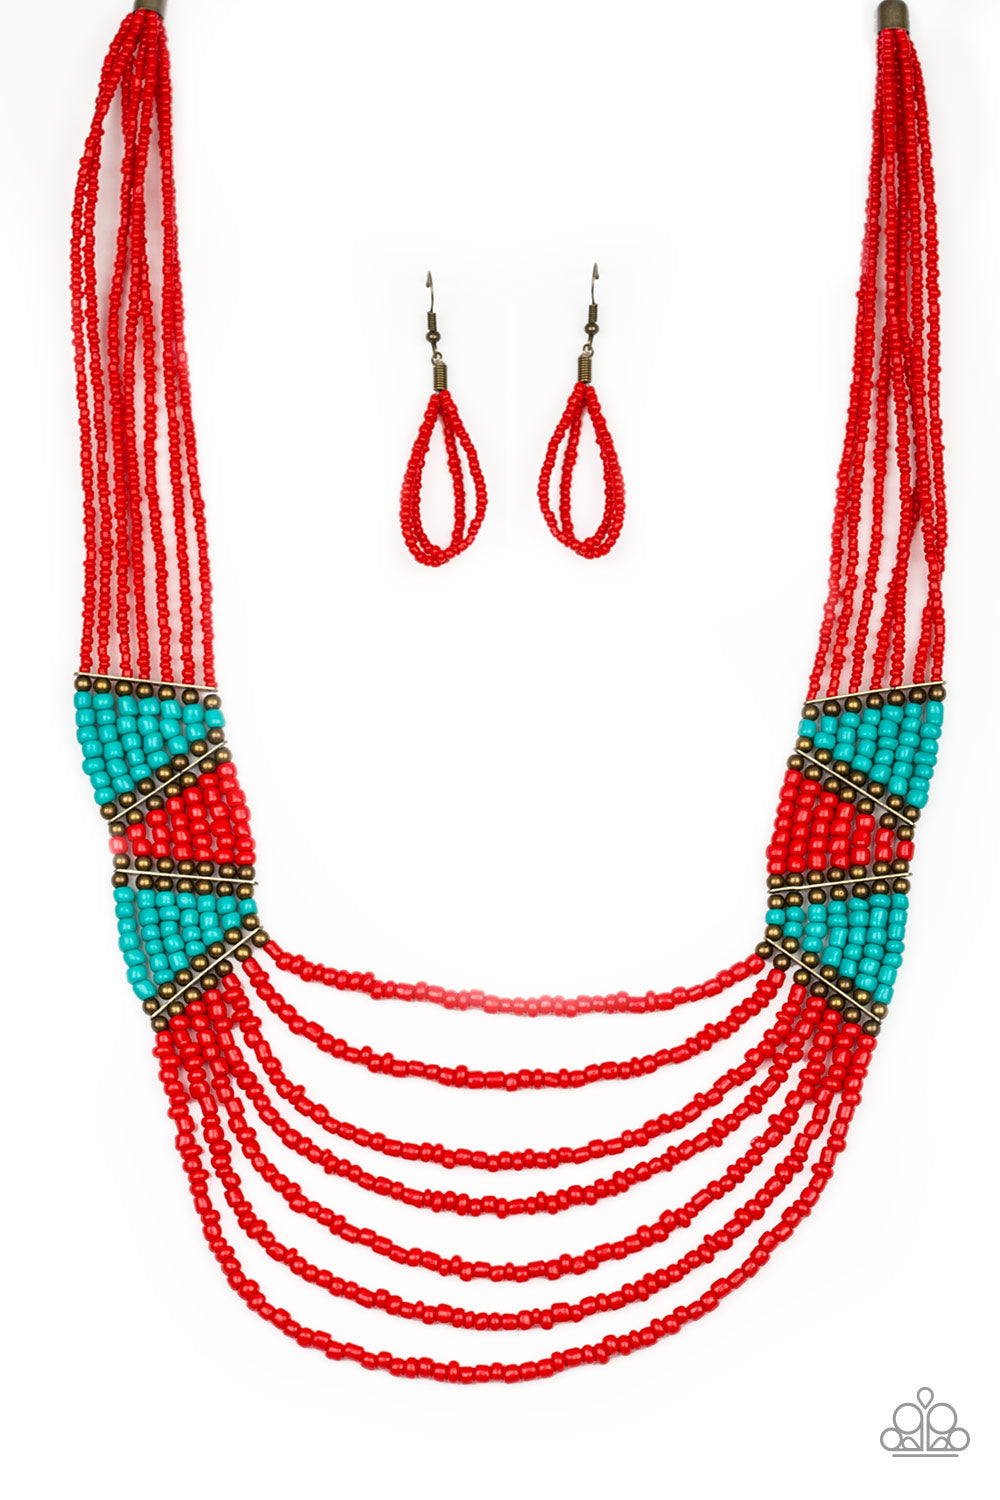 KICKIN' IT OUTBACK - RED SEEDBEAD NECKLACE